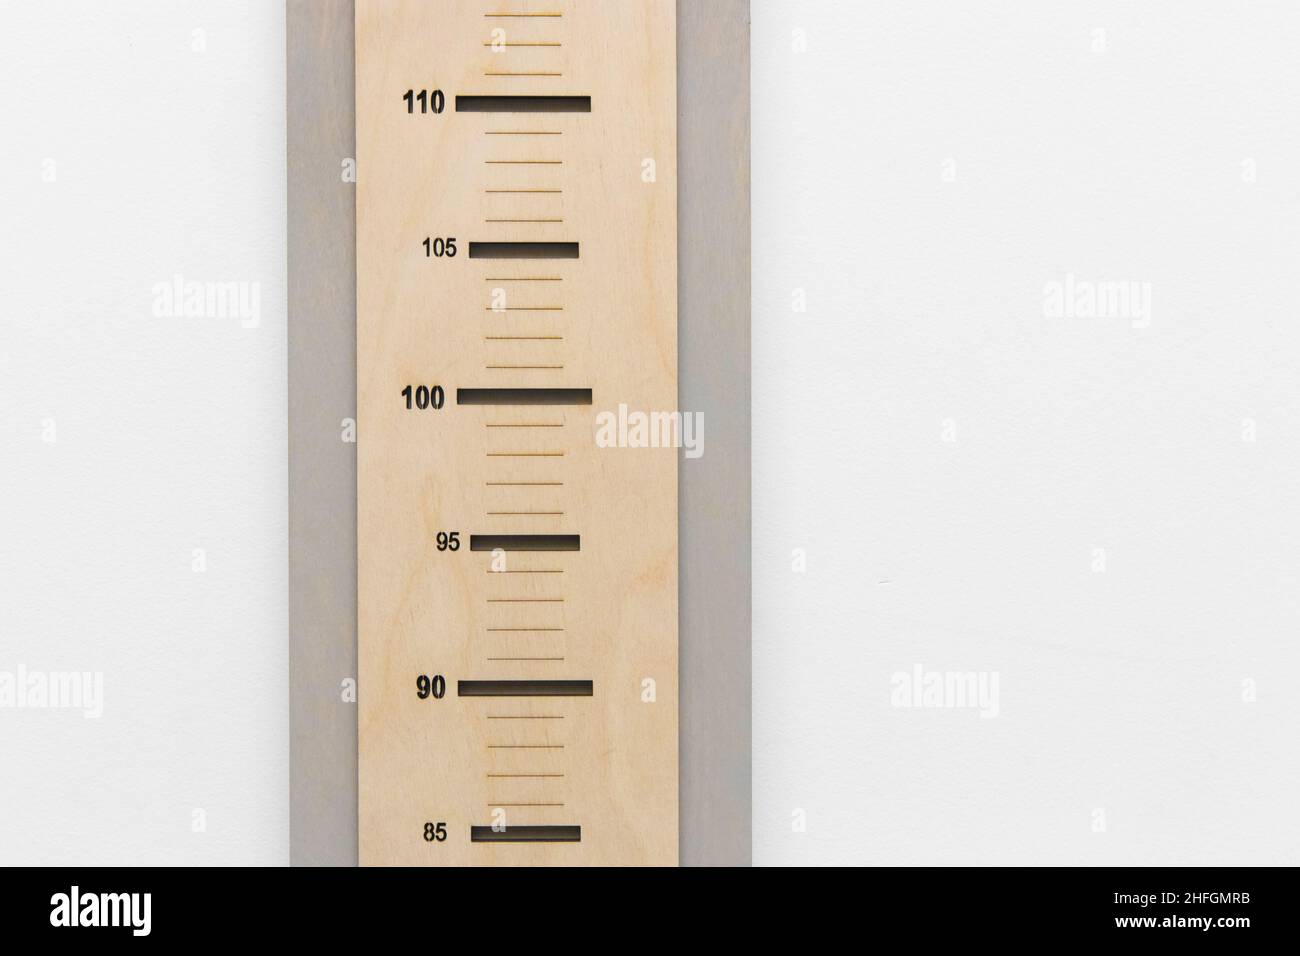 Ruler height measure child height scale size against a white wall. Stock Photo